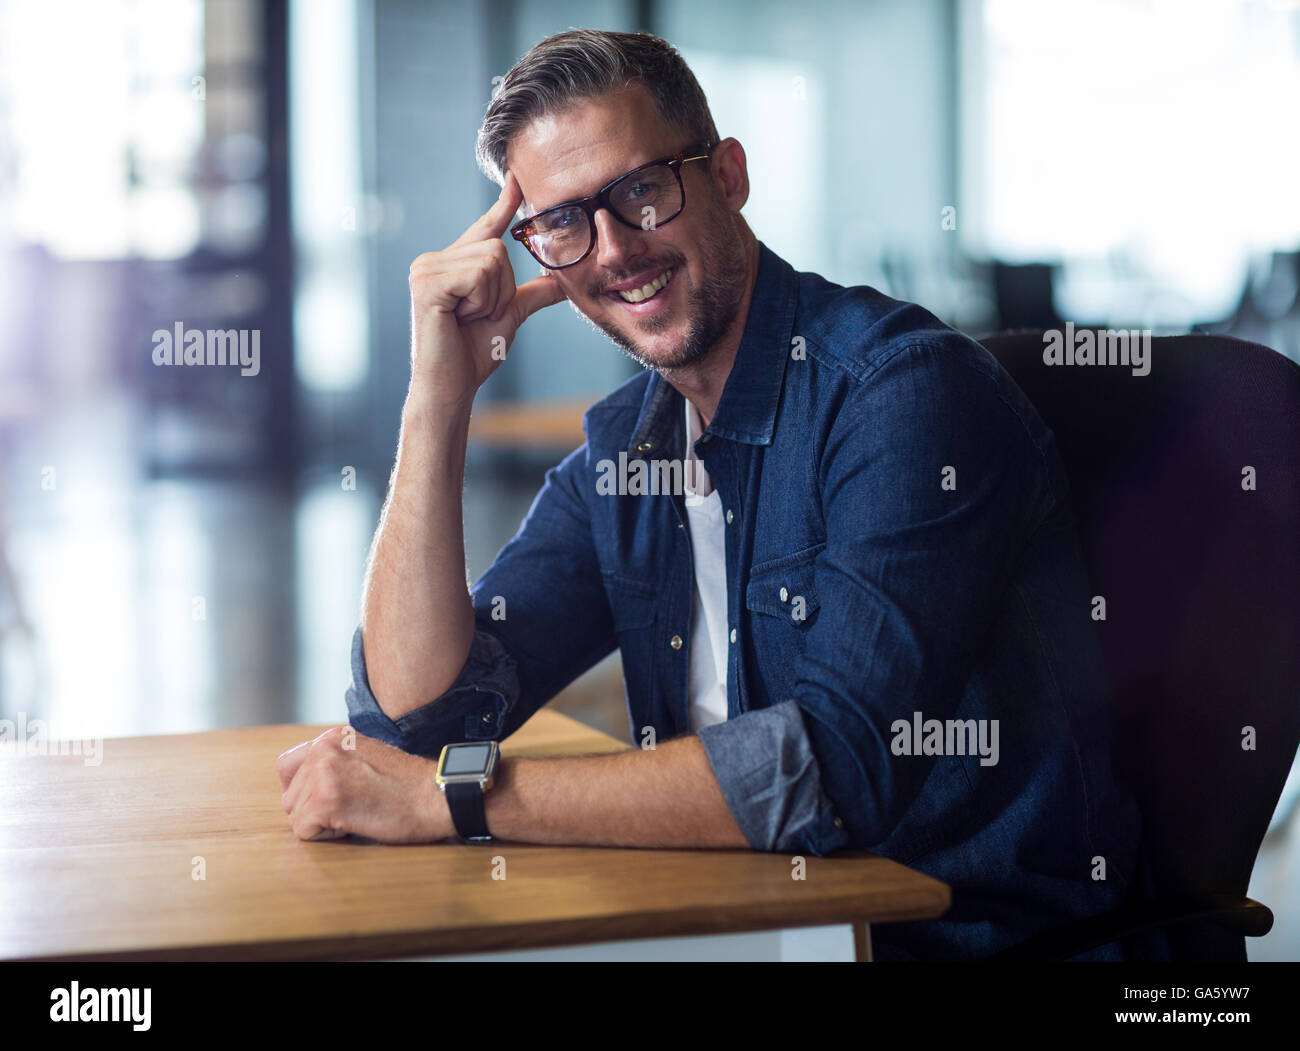 Portrait of man sitting in office Stock Photo